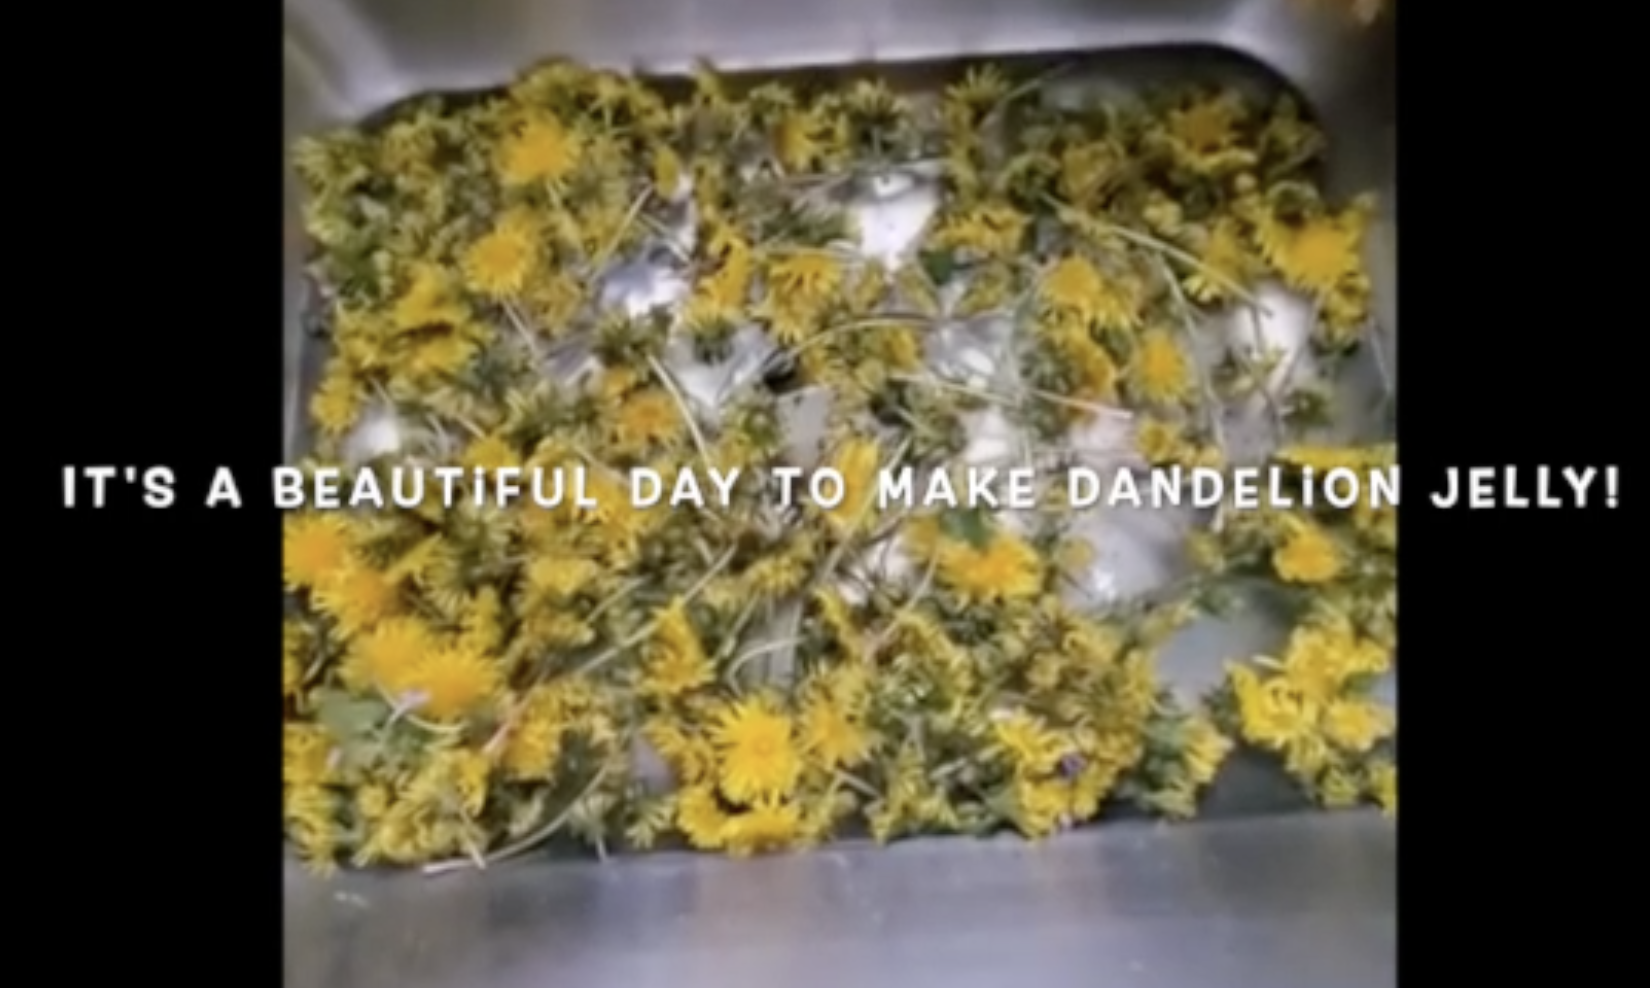 It’s a beautiful day to make dandelion jelly!